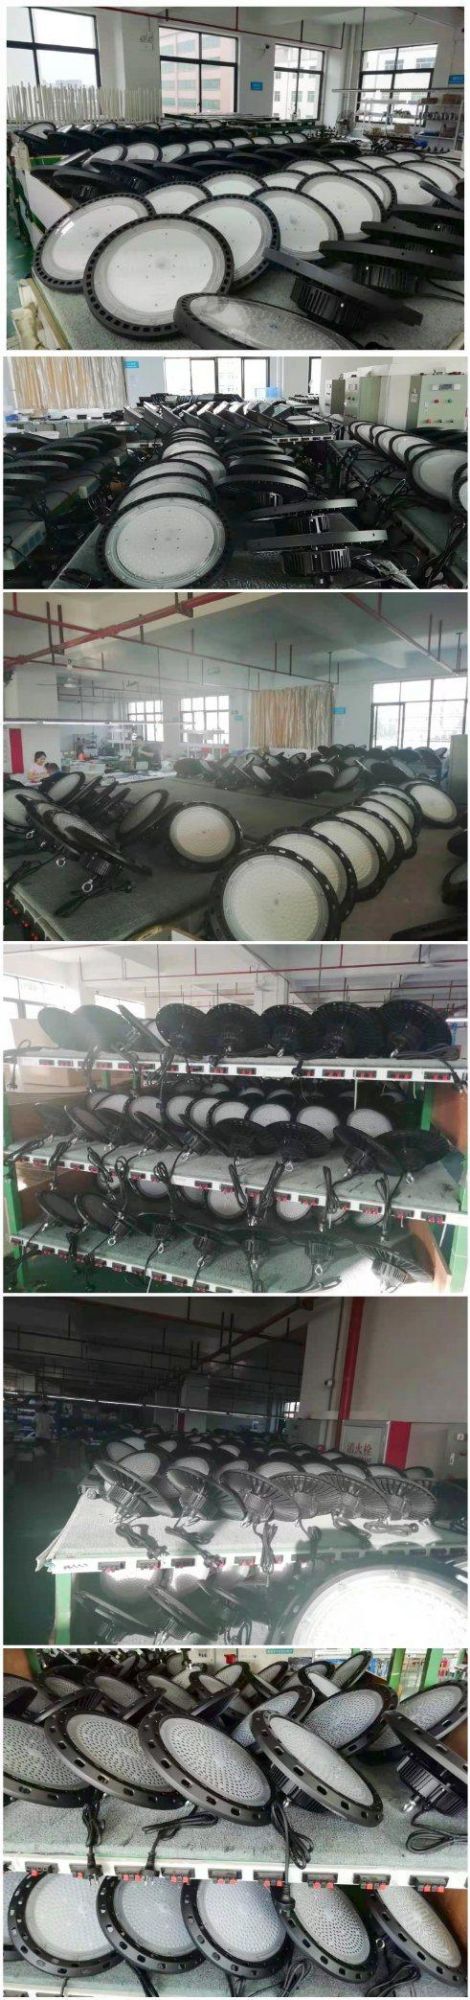 Anti-Glare High Bay Light with Aluminum Cover Shade 120lm/W 130lm/W IP66 200W LED Canopy Light